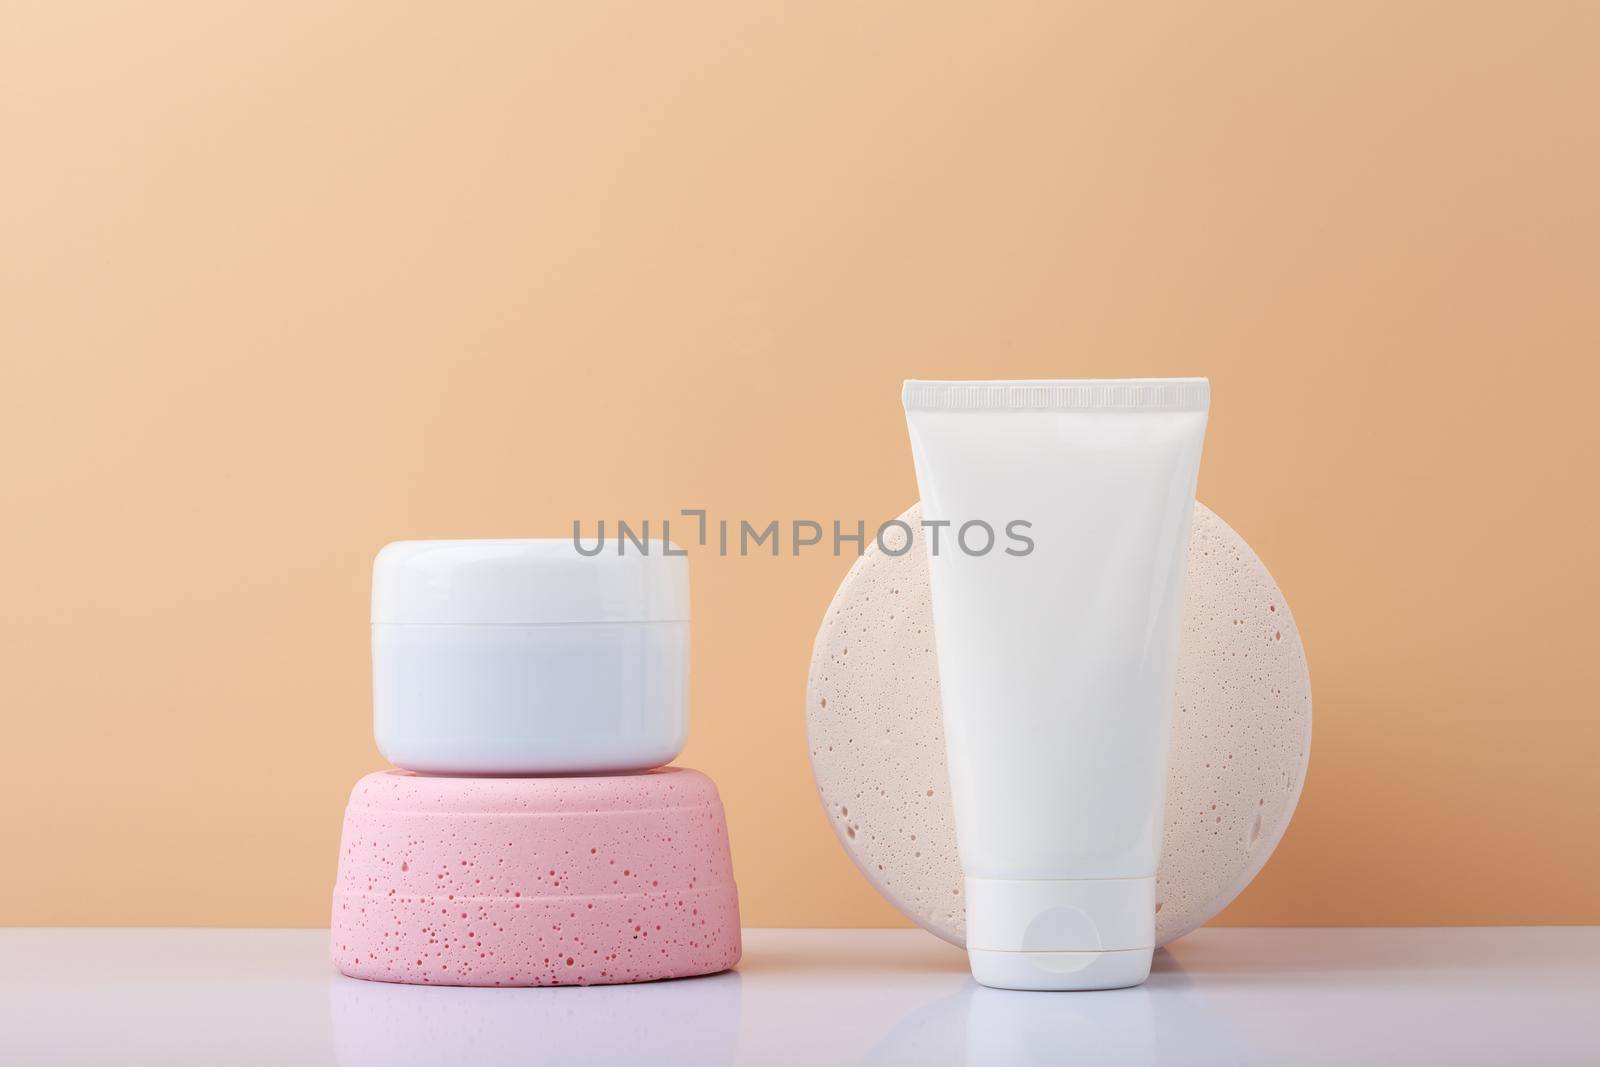 White jars with scrub and mask for face or head skin on white table against beige background. Concept of organic beauty products for skin or hair care